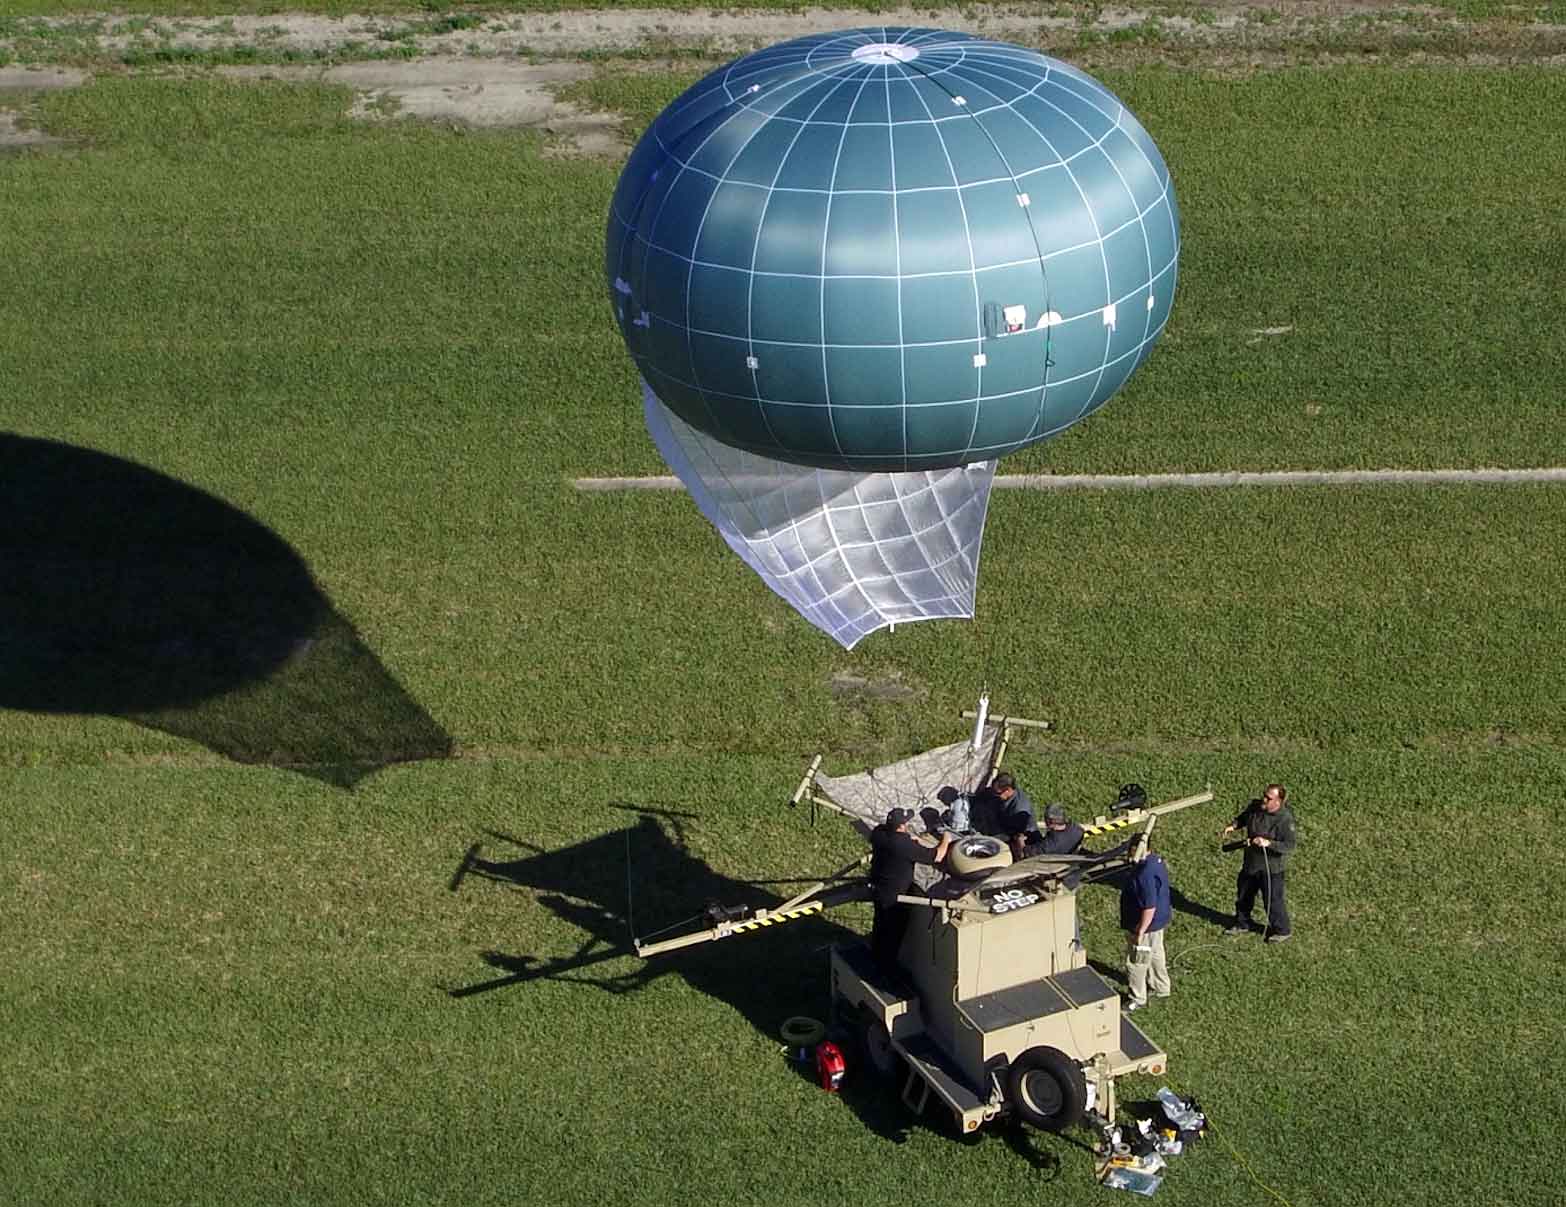 WASP leverages well-understood aerostat technology to elevate network payloads to an advantaged height to enable persistent network connectivity while reducing risk to units conducting retransmission operations. Common applications include extending network communications and intelligence, surveillance and reconnaissance.